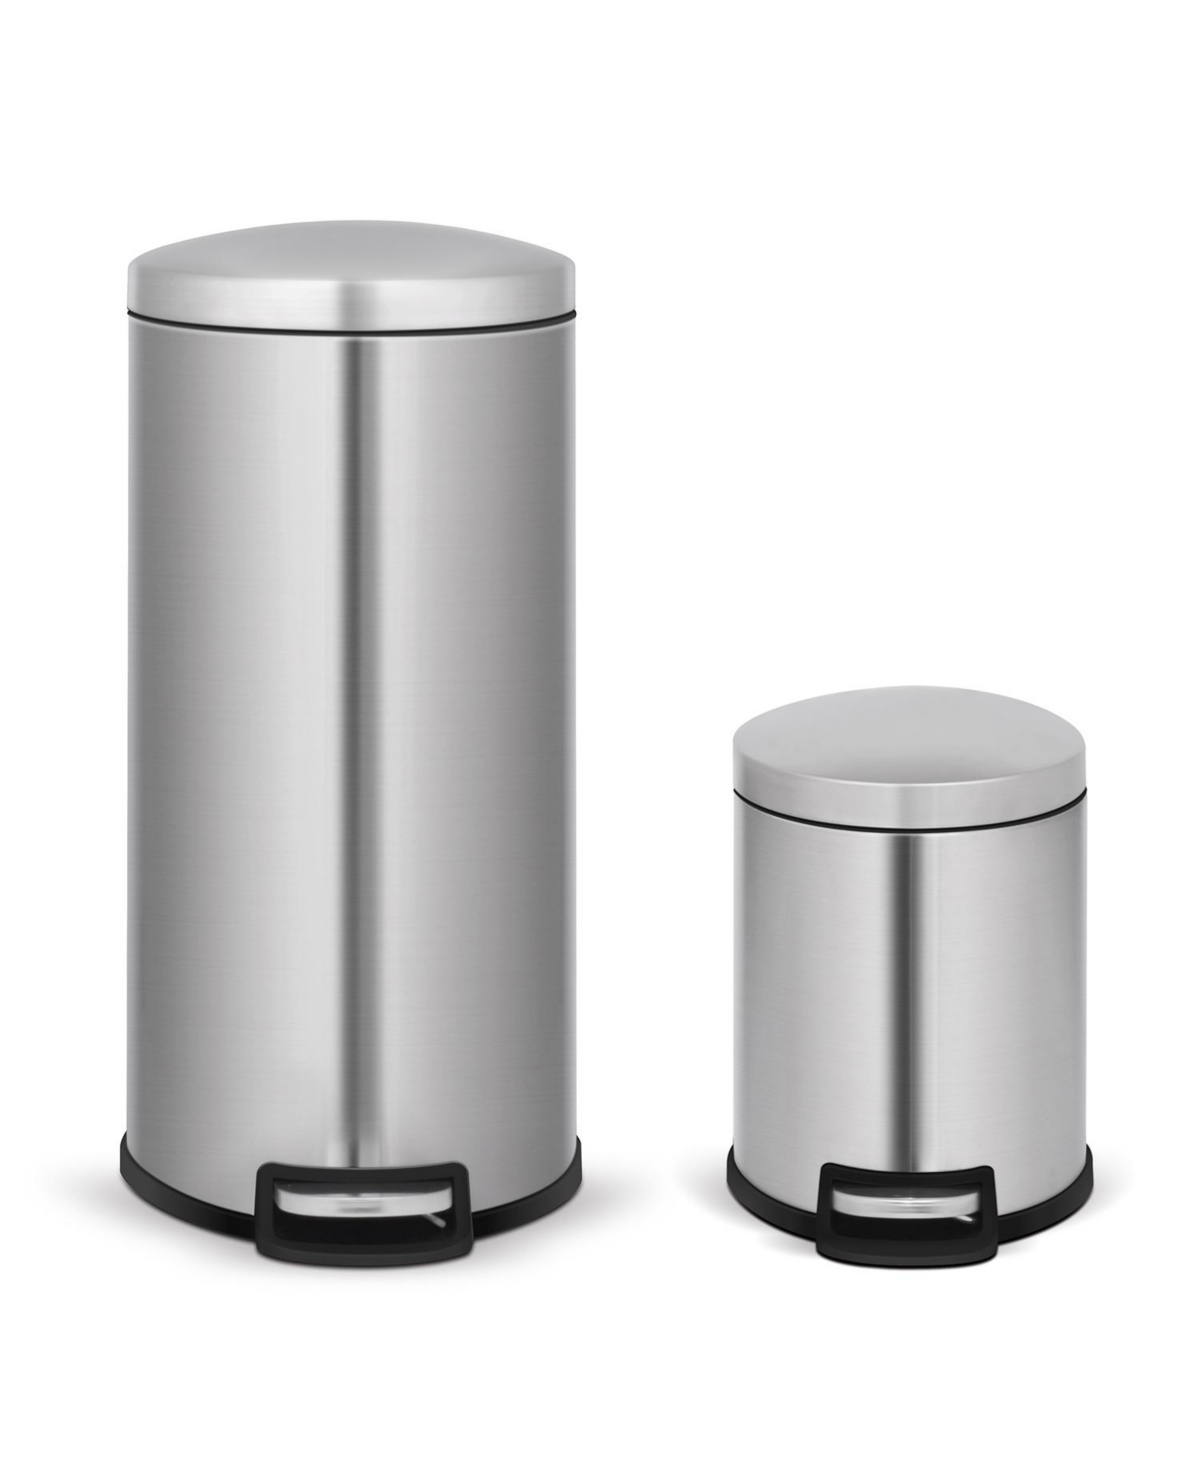 8 Gal./30 Liter and 1.3 Gal./5 Liter Stainless Steel Step-on Trash Can Set for Kitchen and Bathroom - Silver